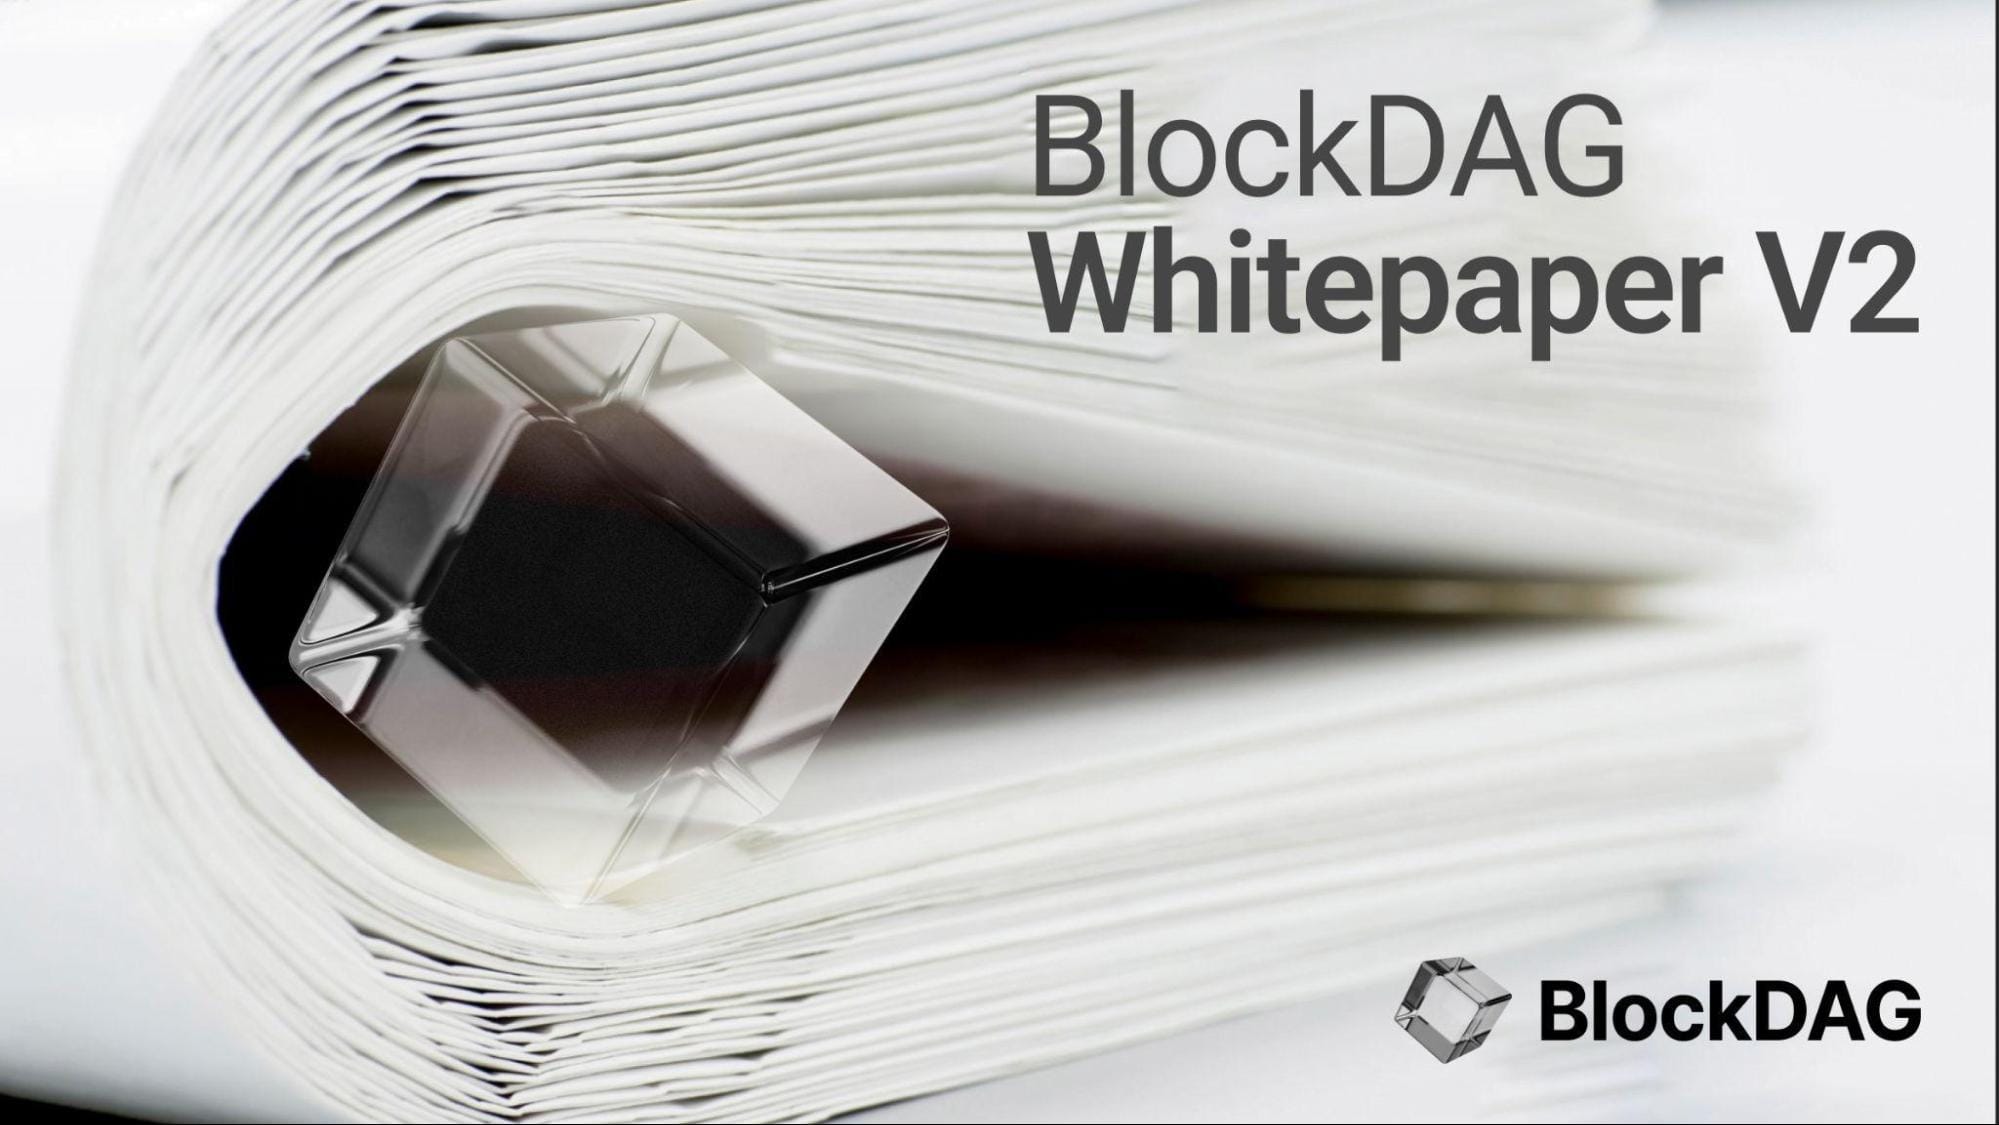 BlockDAG Captivates the Crypto Sphere with its DAGpaper Release, Eyeing an Unmatched 20,000x ROI, While Surpassing Cardano and Chainlink’s Progress